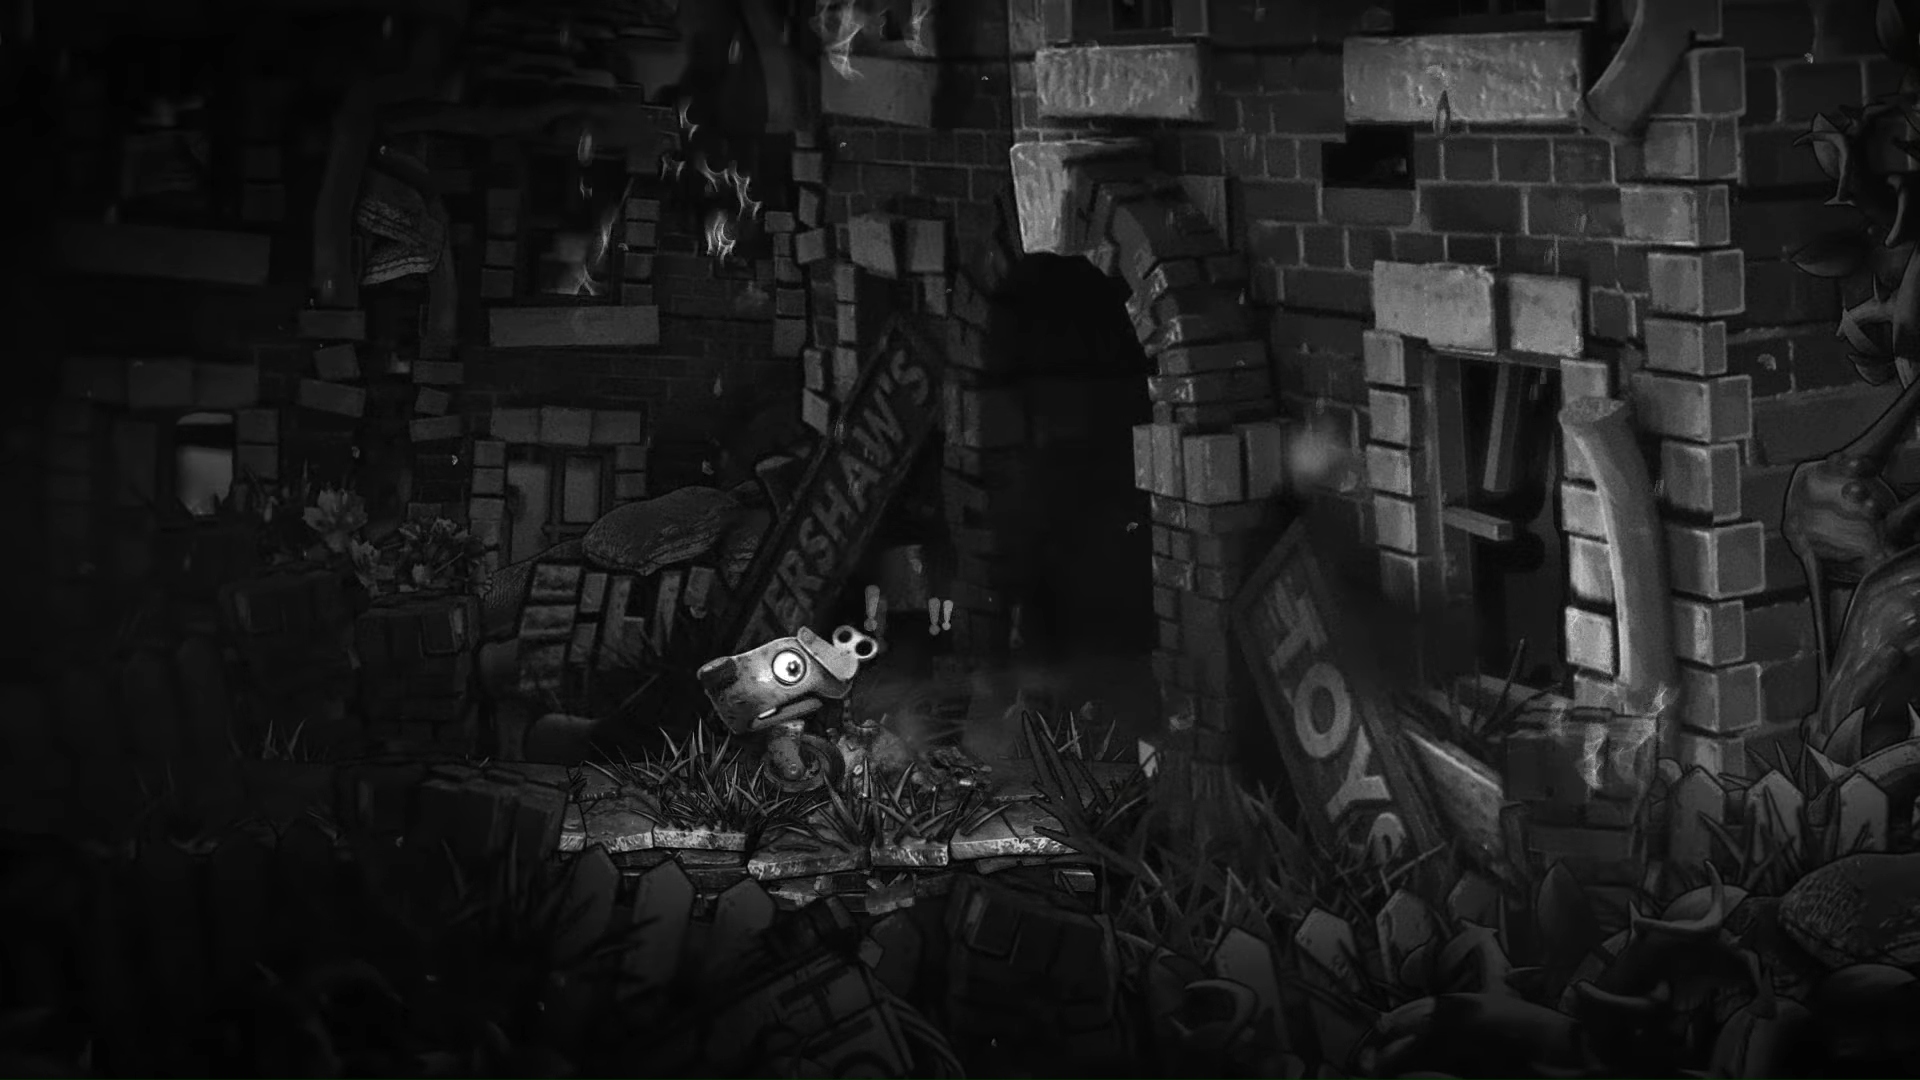 Best PC games on mobile: The Unlikely Legend of Rusty Pup. A screenshot shows Rusty Pup waking up in a darkened location.